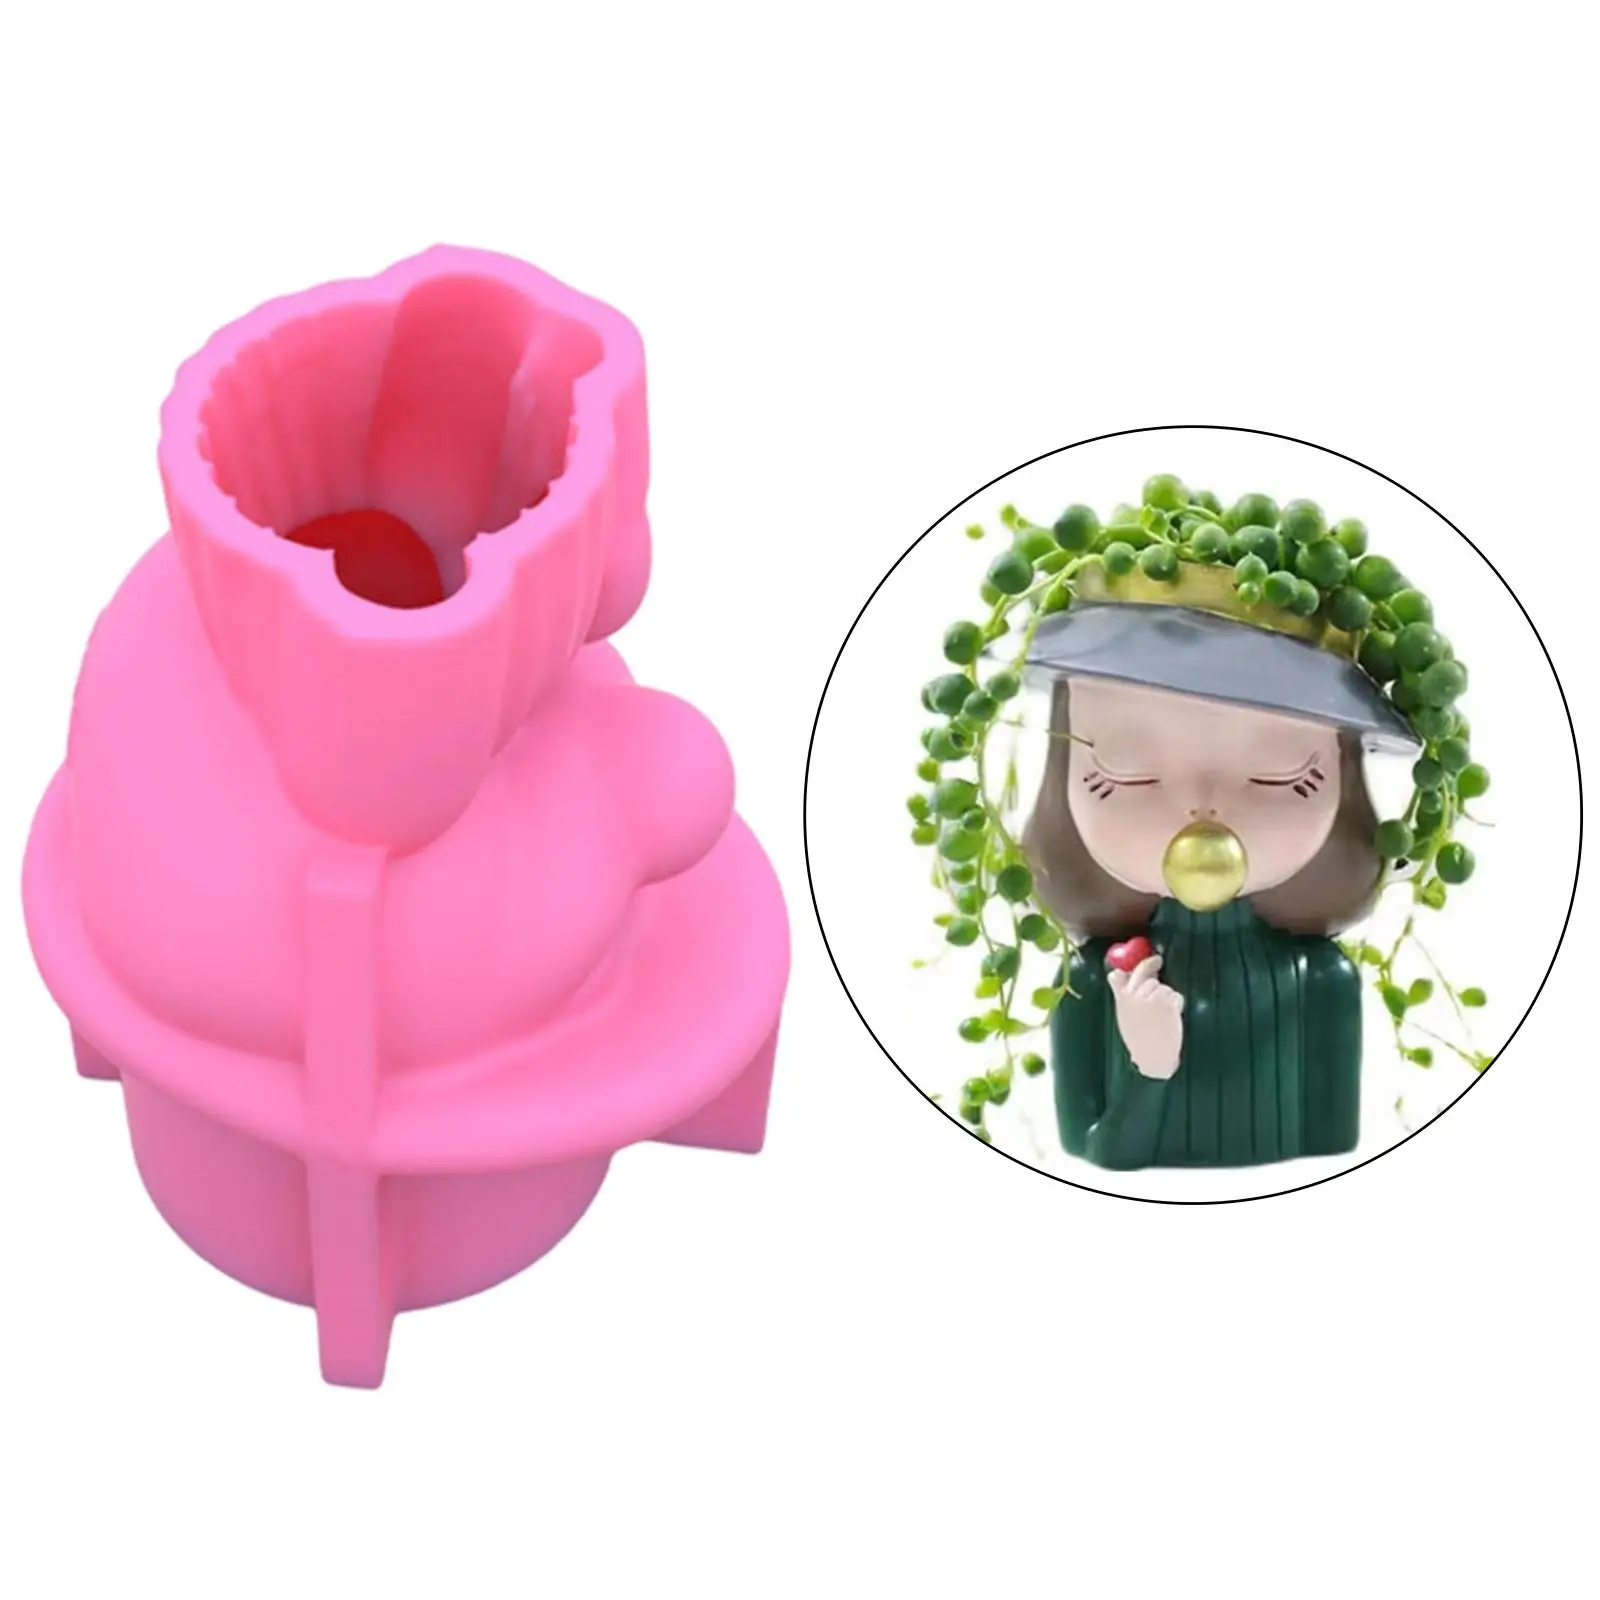 3D Girl Head Silicone Mold Vase Succulent Pot Resin Candle Wax Polymer Plants Pot Pen Holder Handmade Clay Soap Making DIY Mould